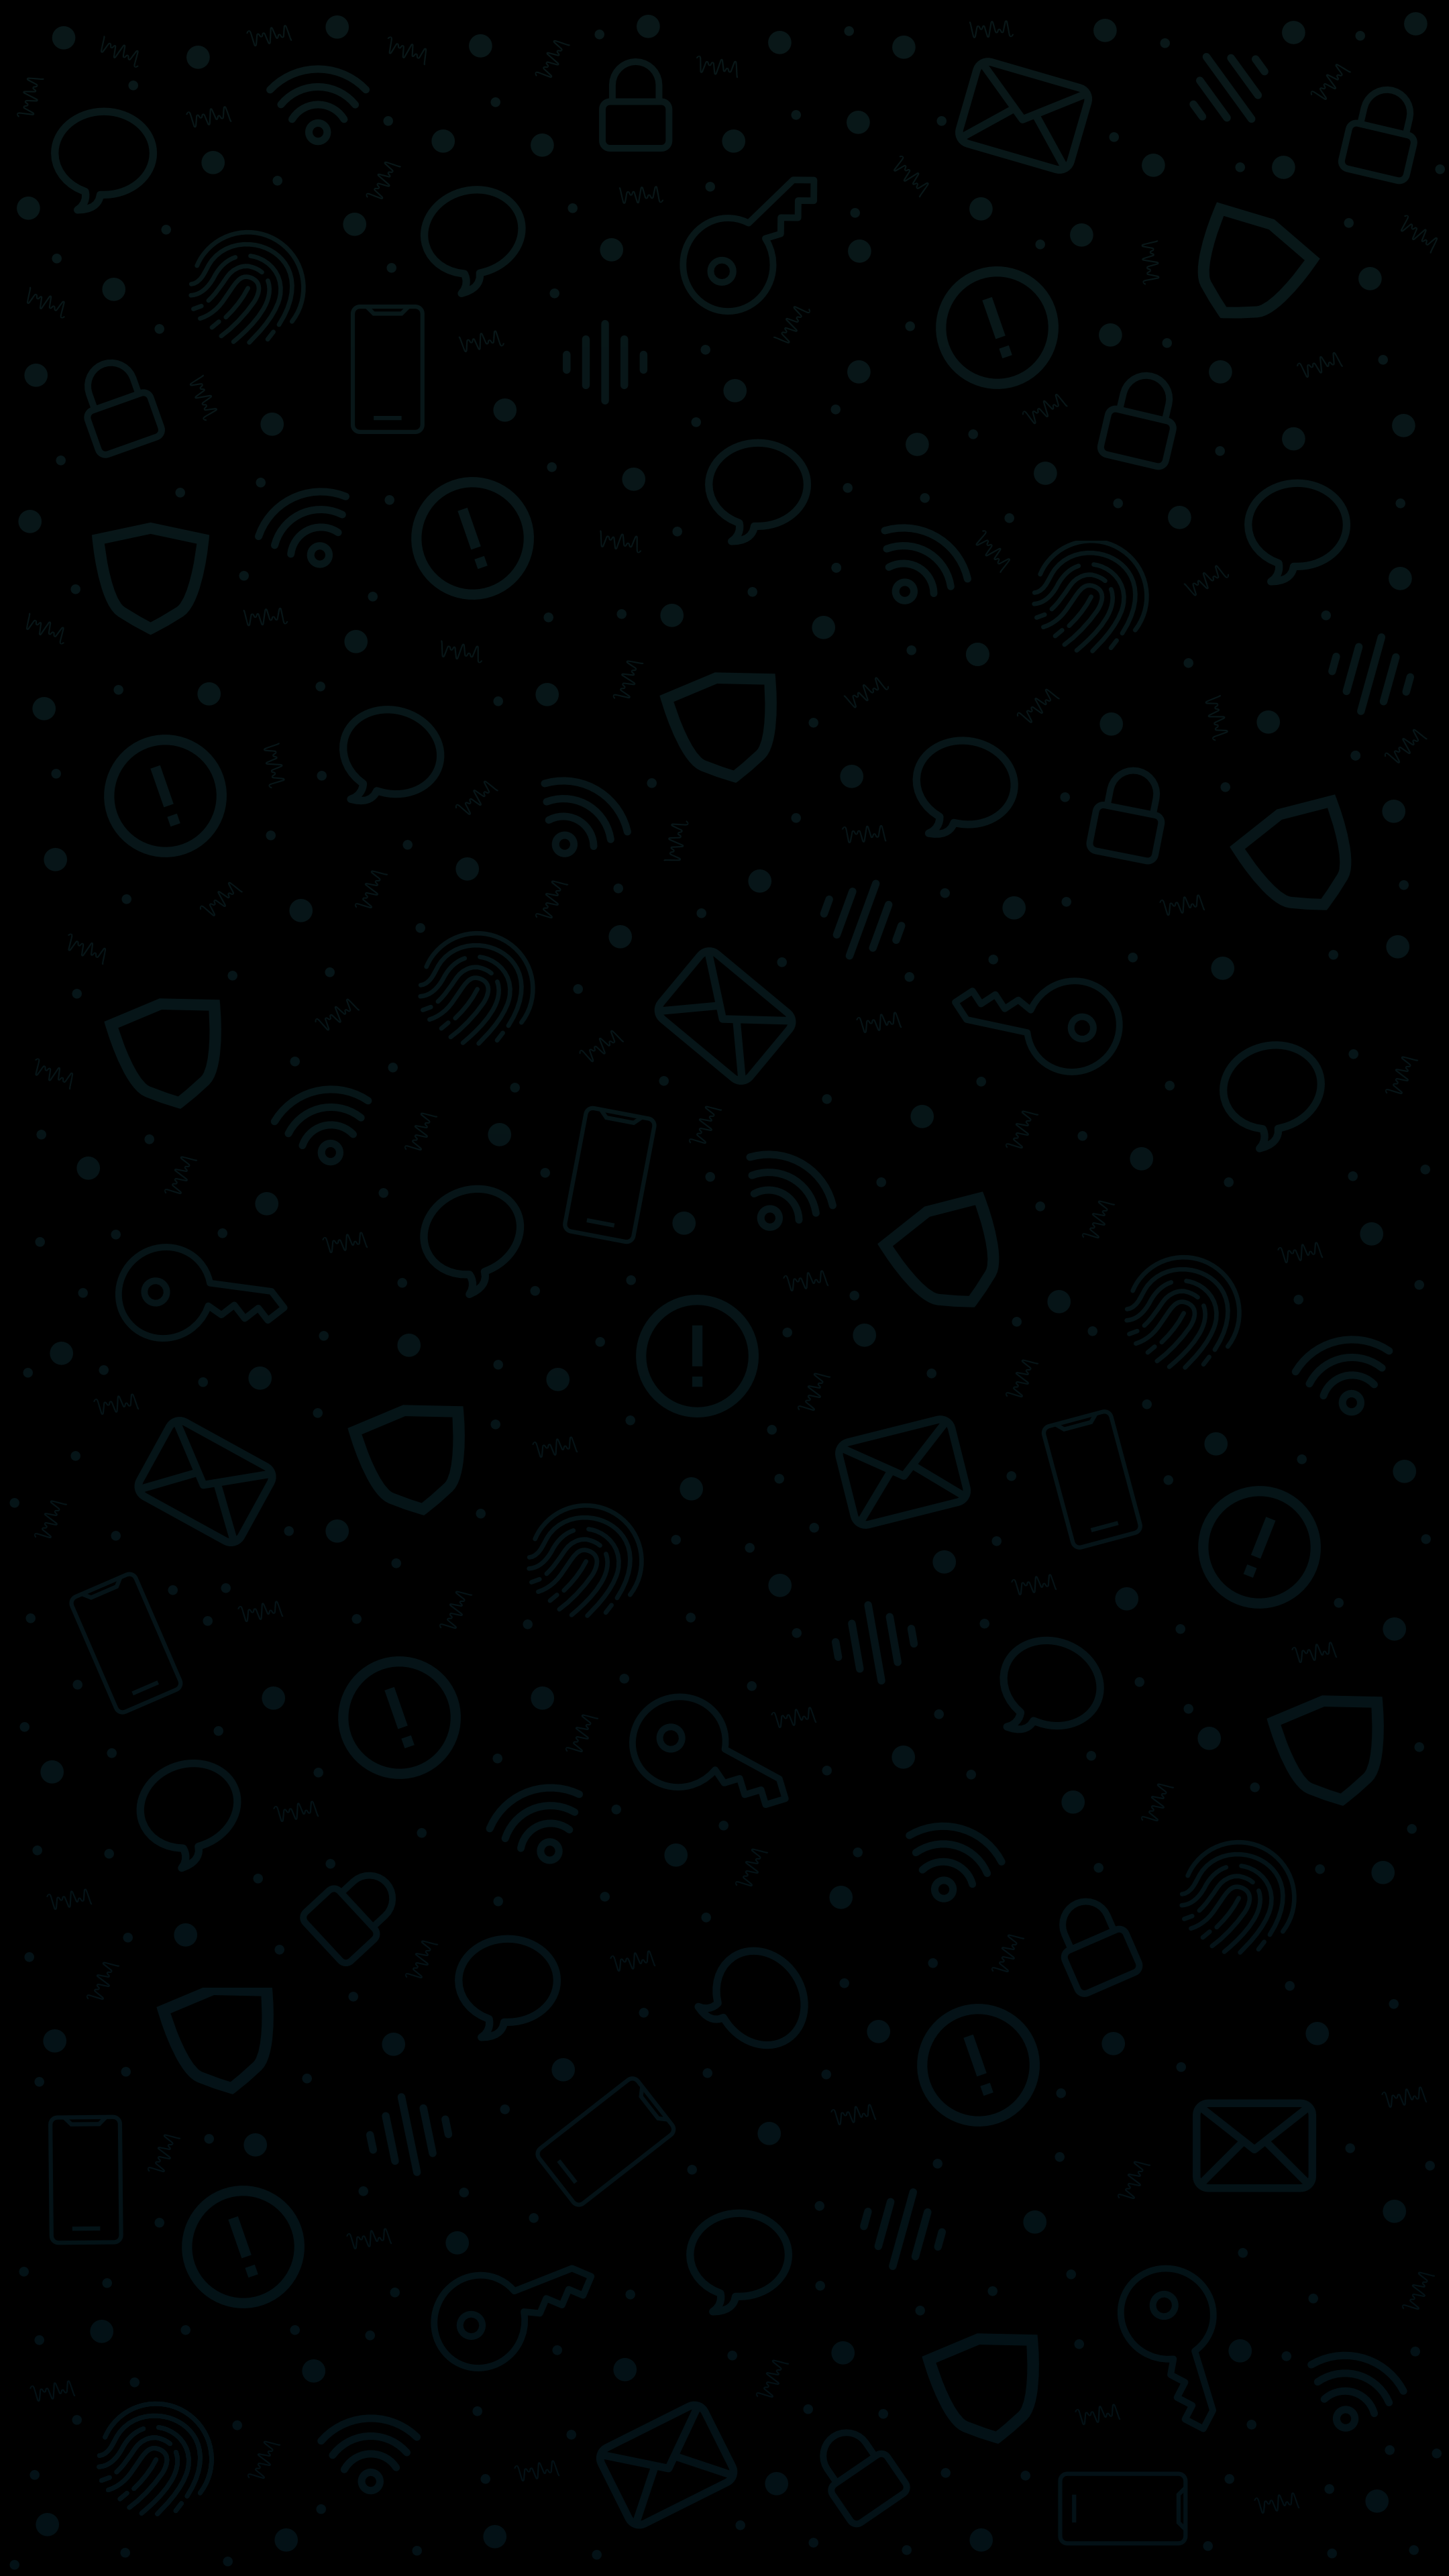 teal icon background 20%